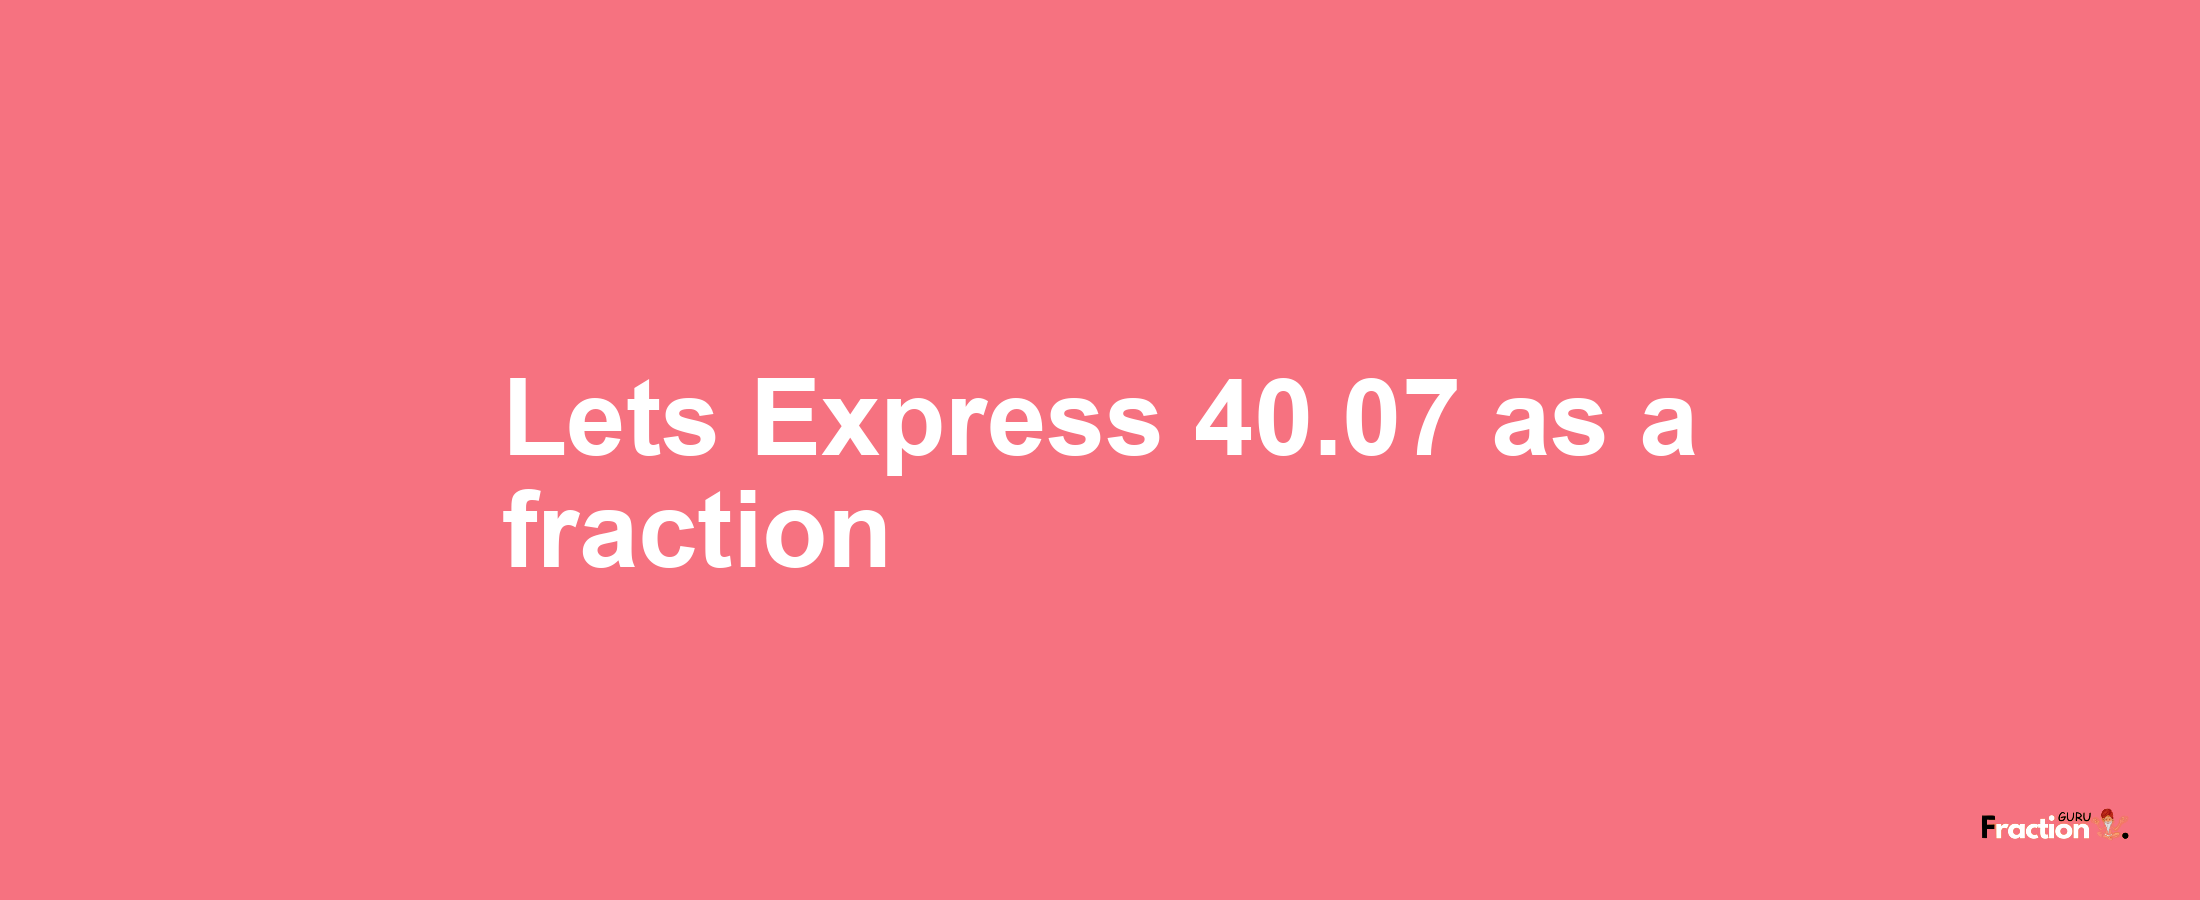 Lets Express 40.07 as afraction